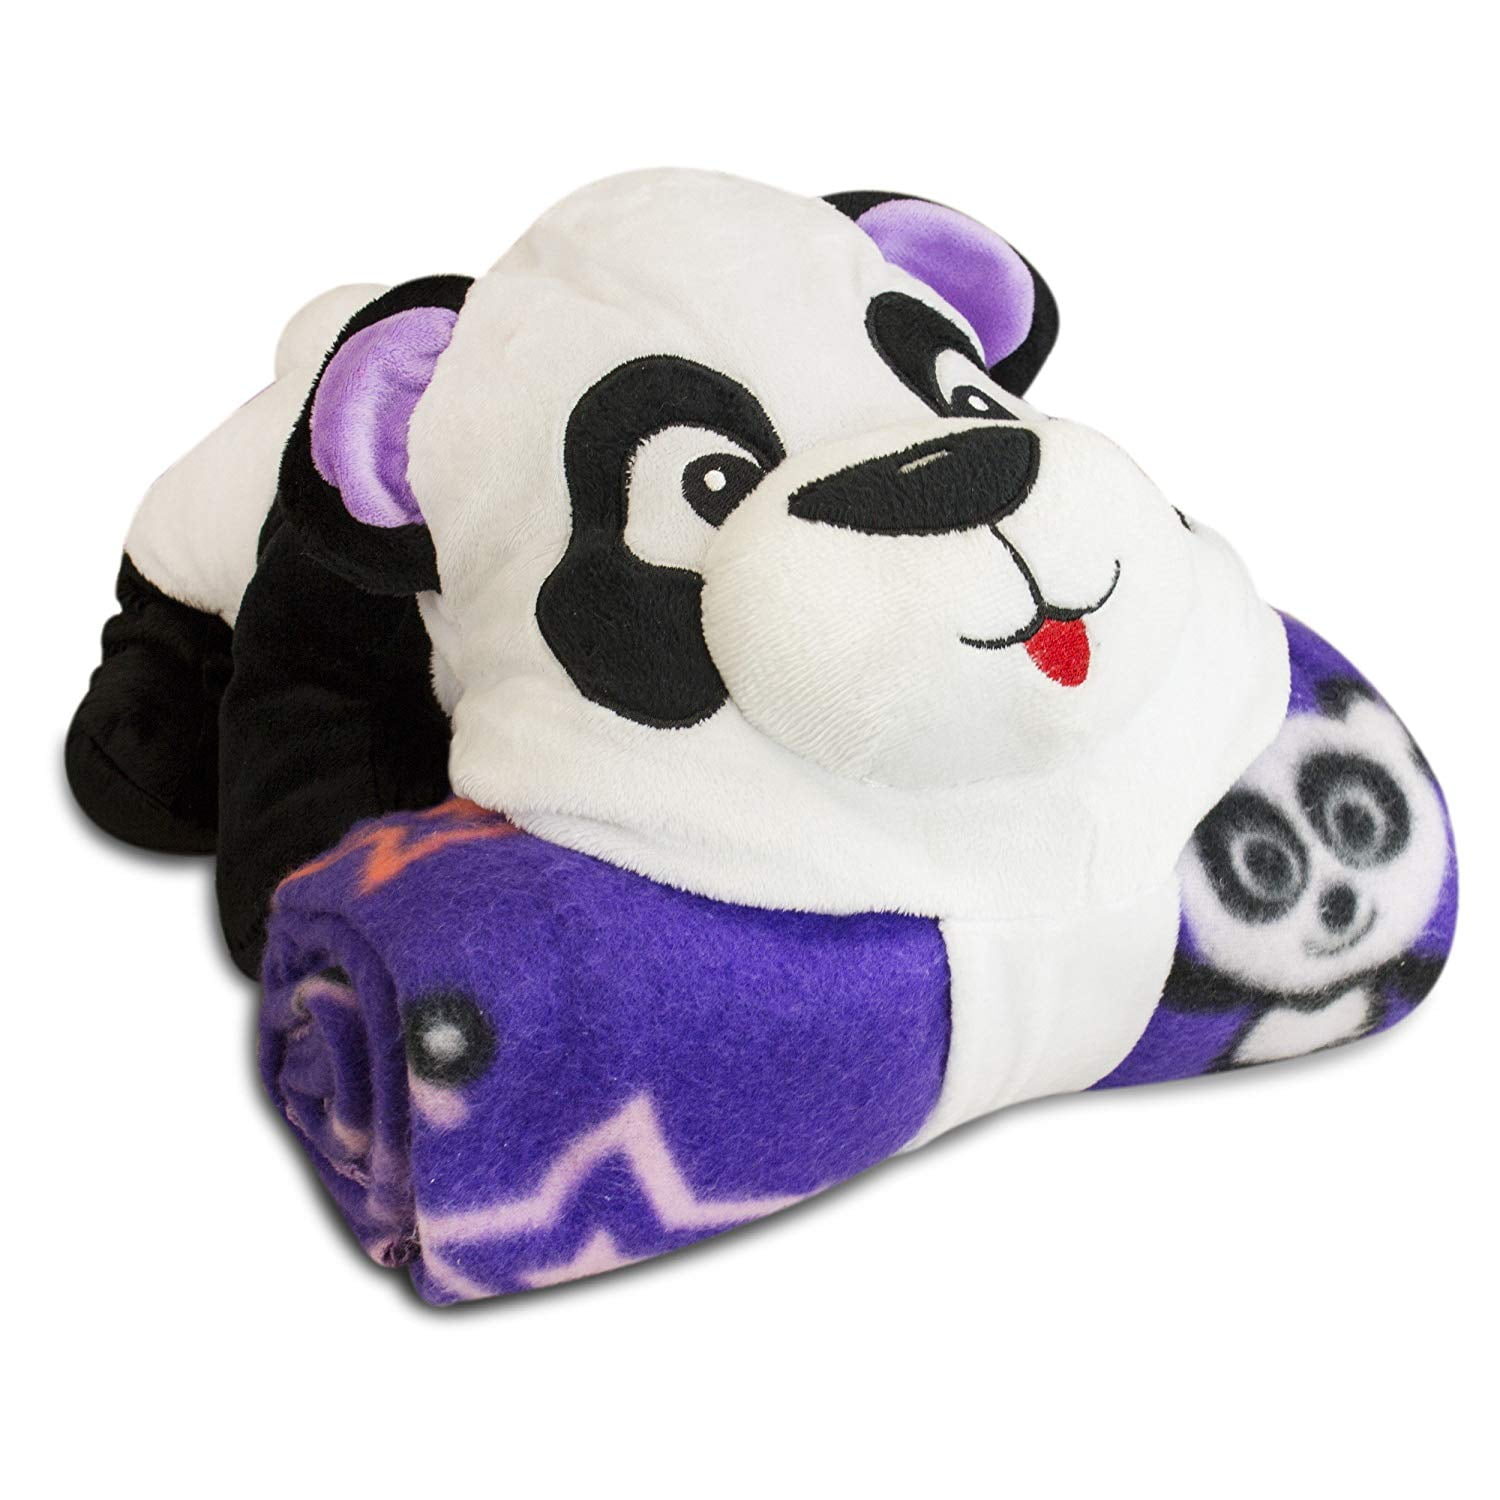 Qilmy Merry Christmas Greeting Card with Fun Panda Throw Blankets Soft Fleece Plush for Bed Couch Sofa Cozy for Adults Women Kids 60 x 90 Inch Warm 